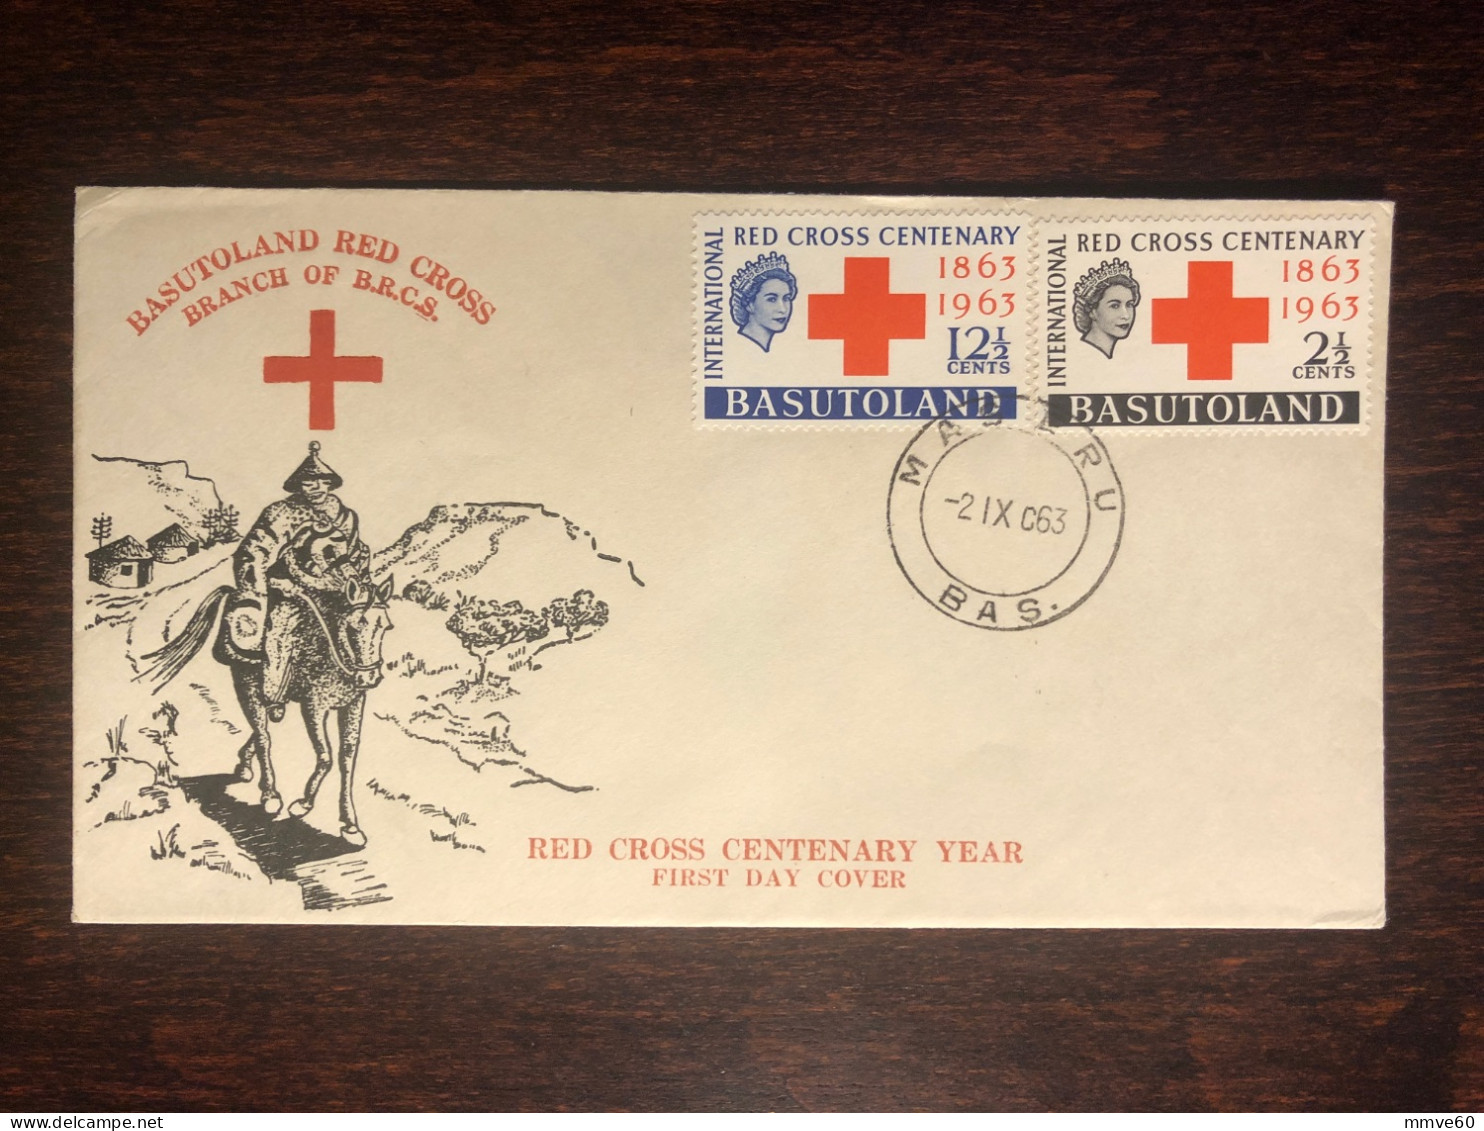 BASUTOLAND FDC COVER 1963 YEAR RED CROSS HEALTH MEDICINE STAMPS - 1933-1964 Colonia Británica